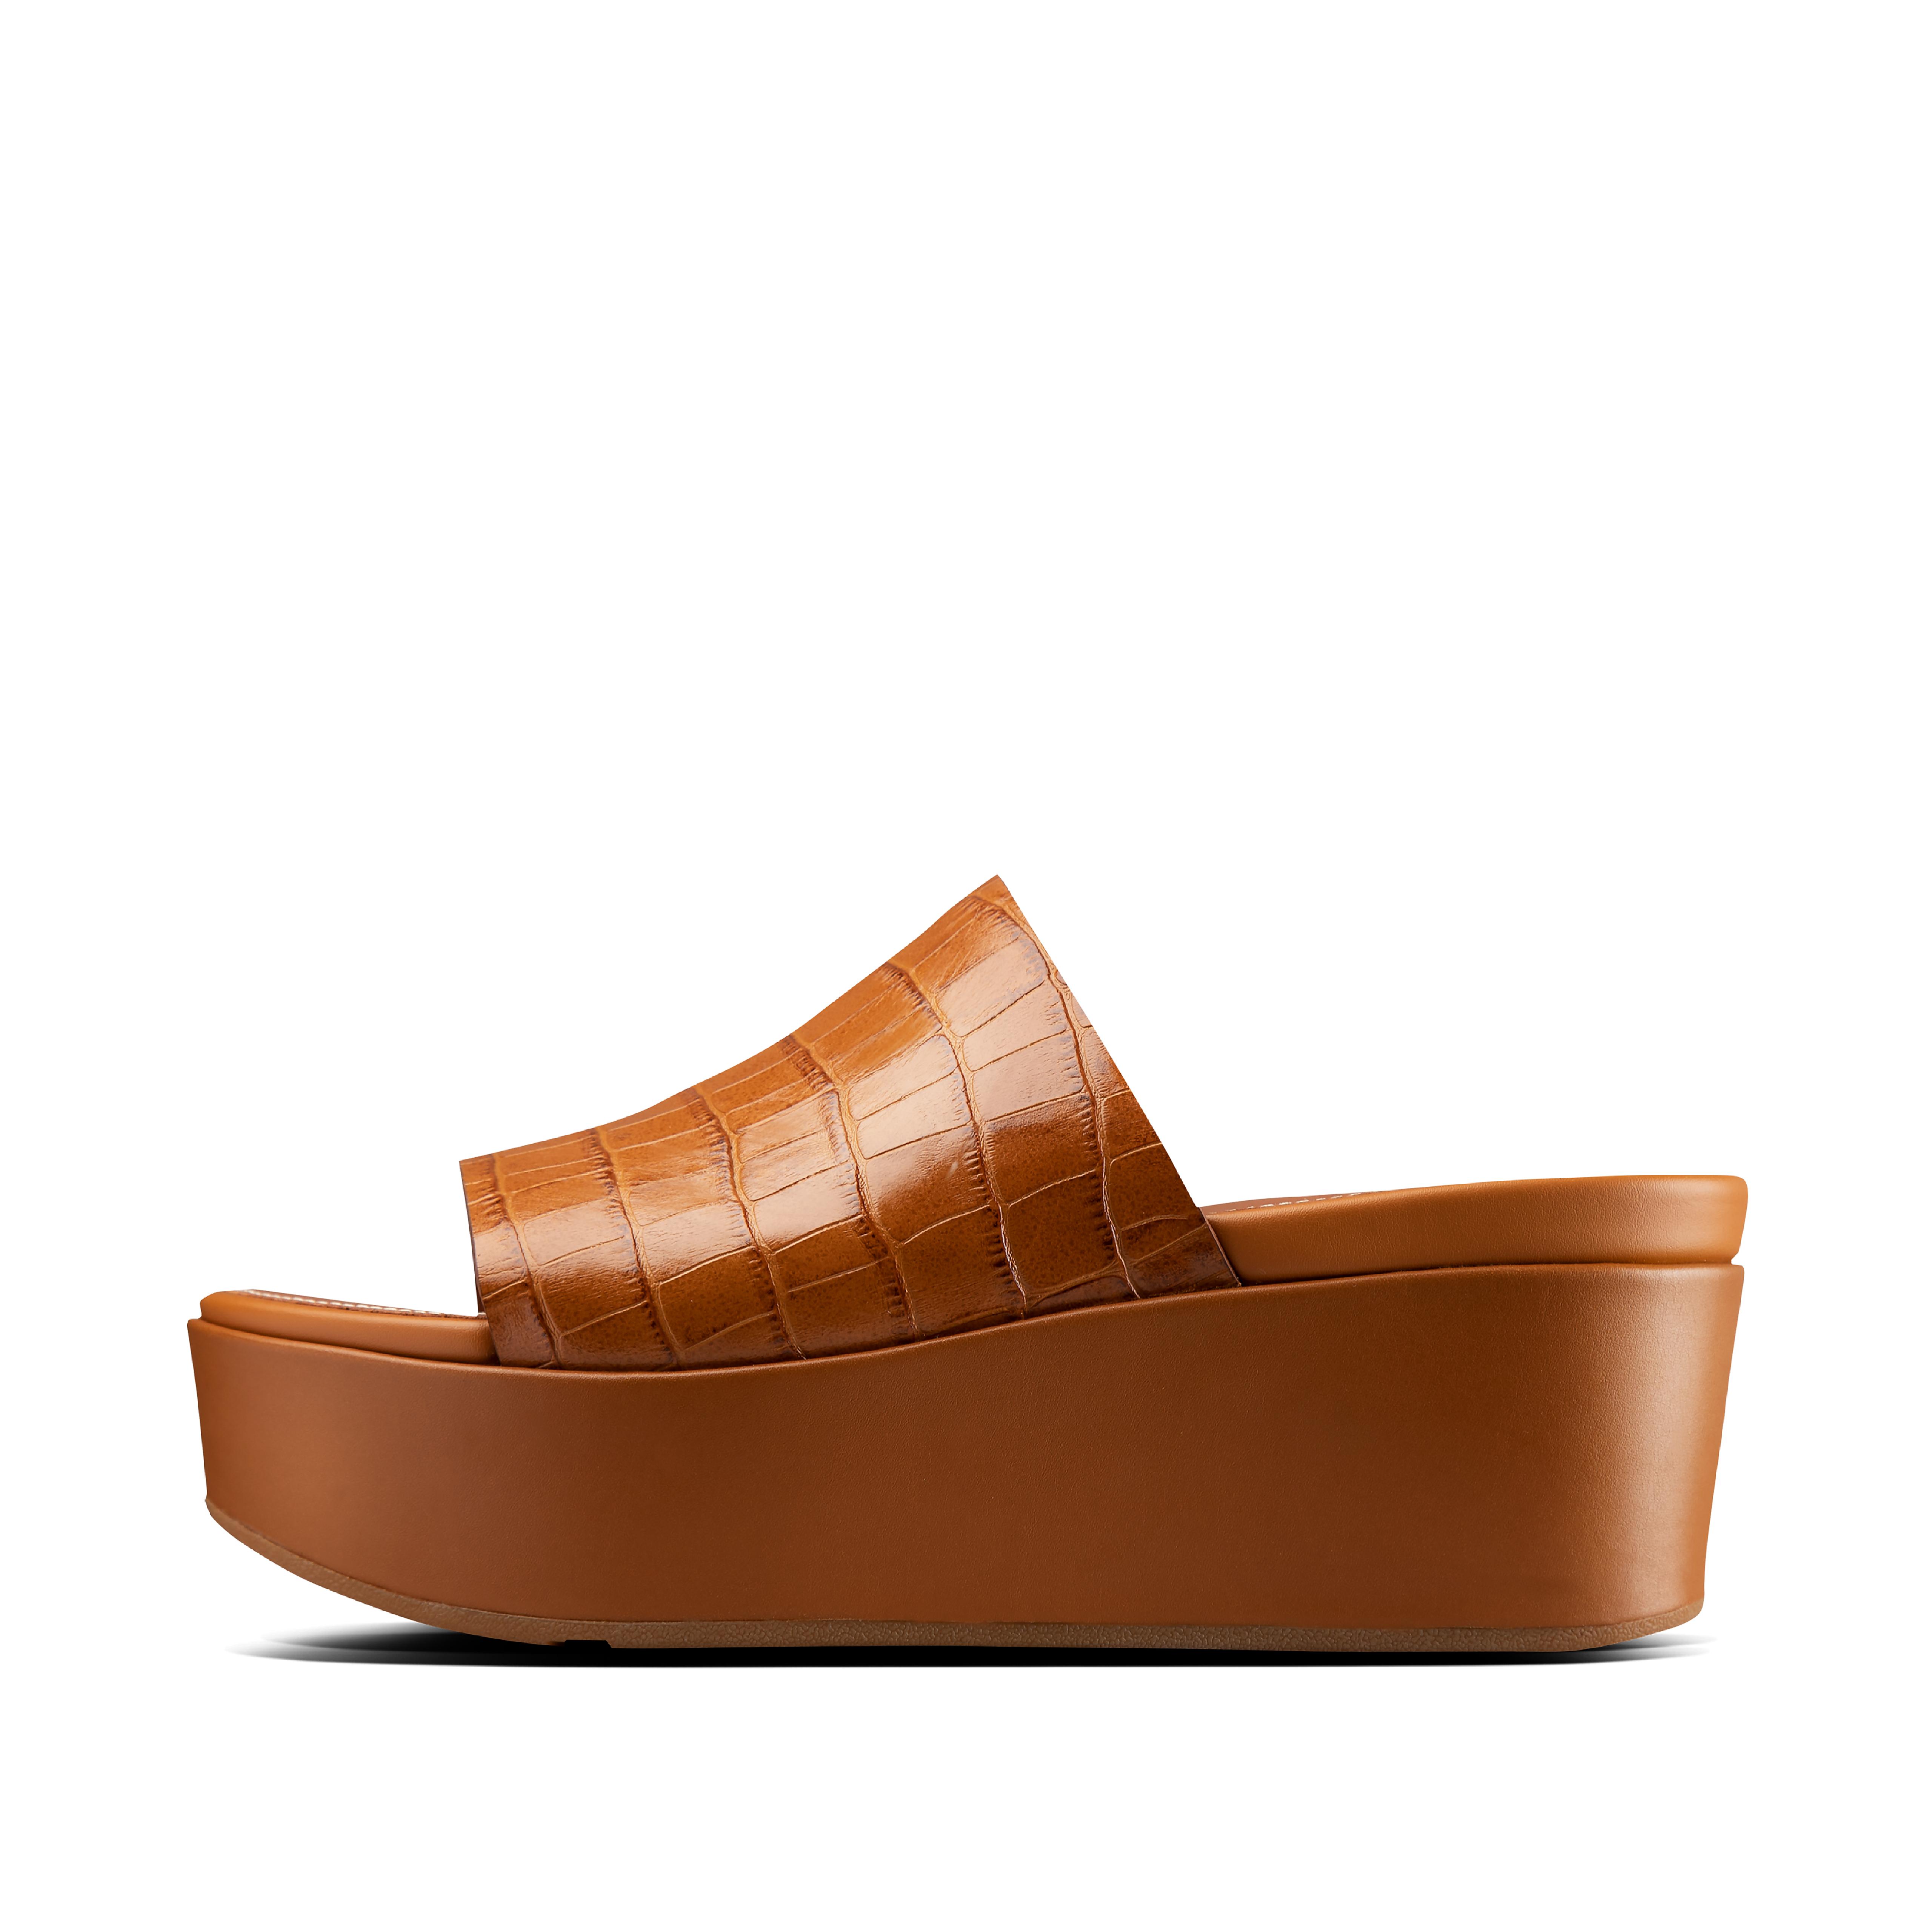 fitflop wedges